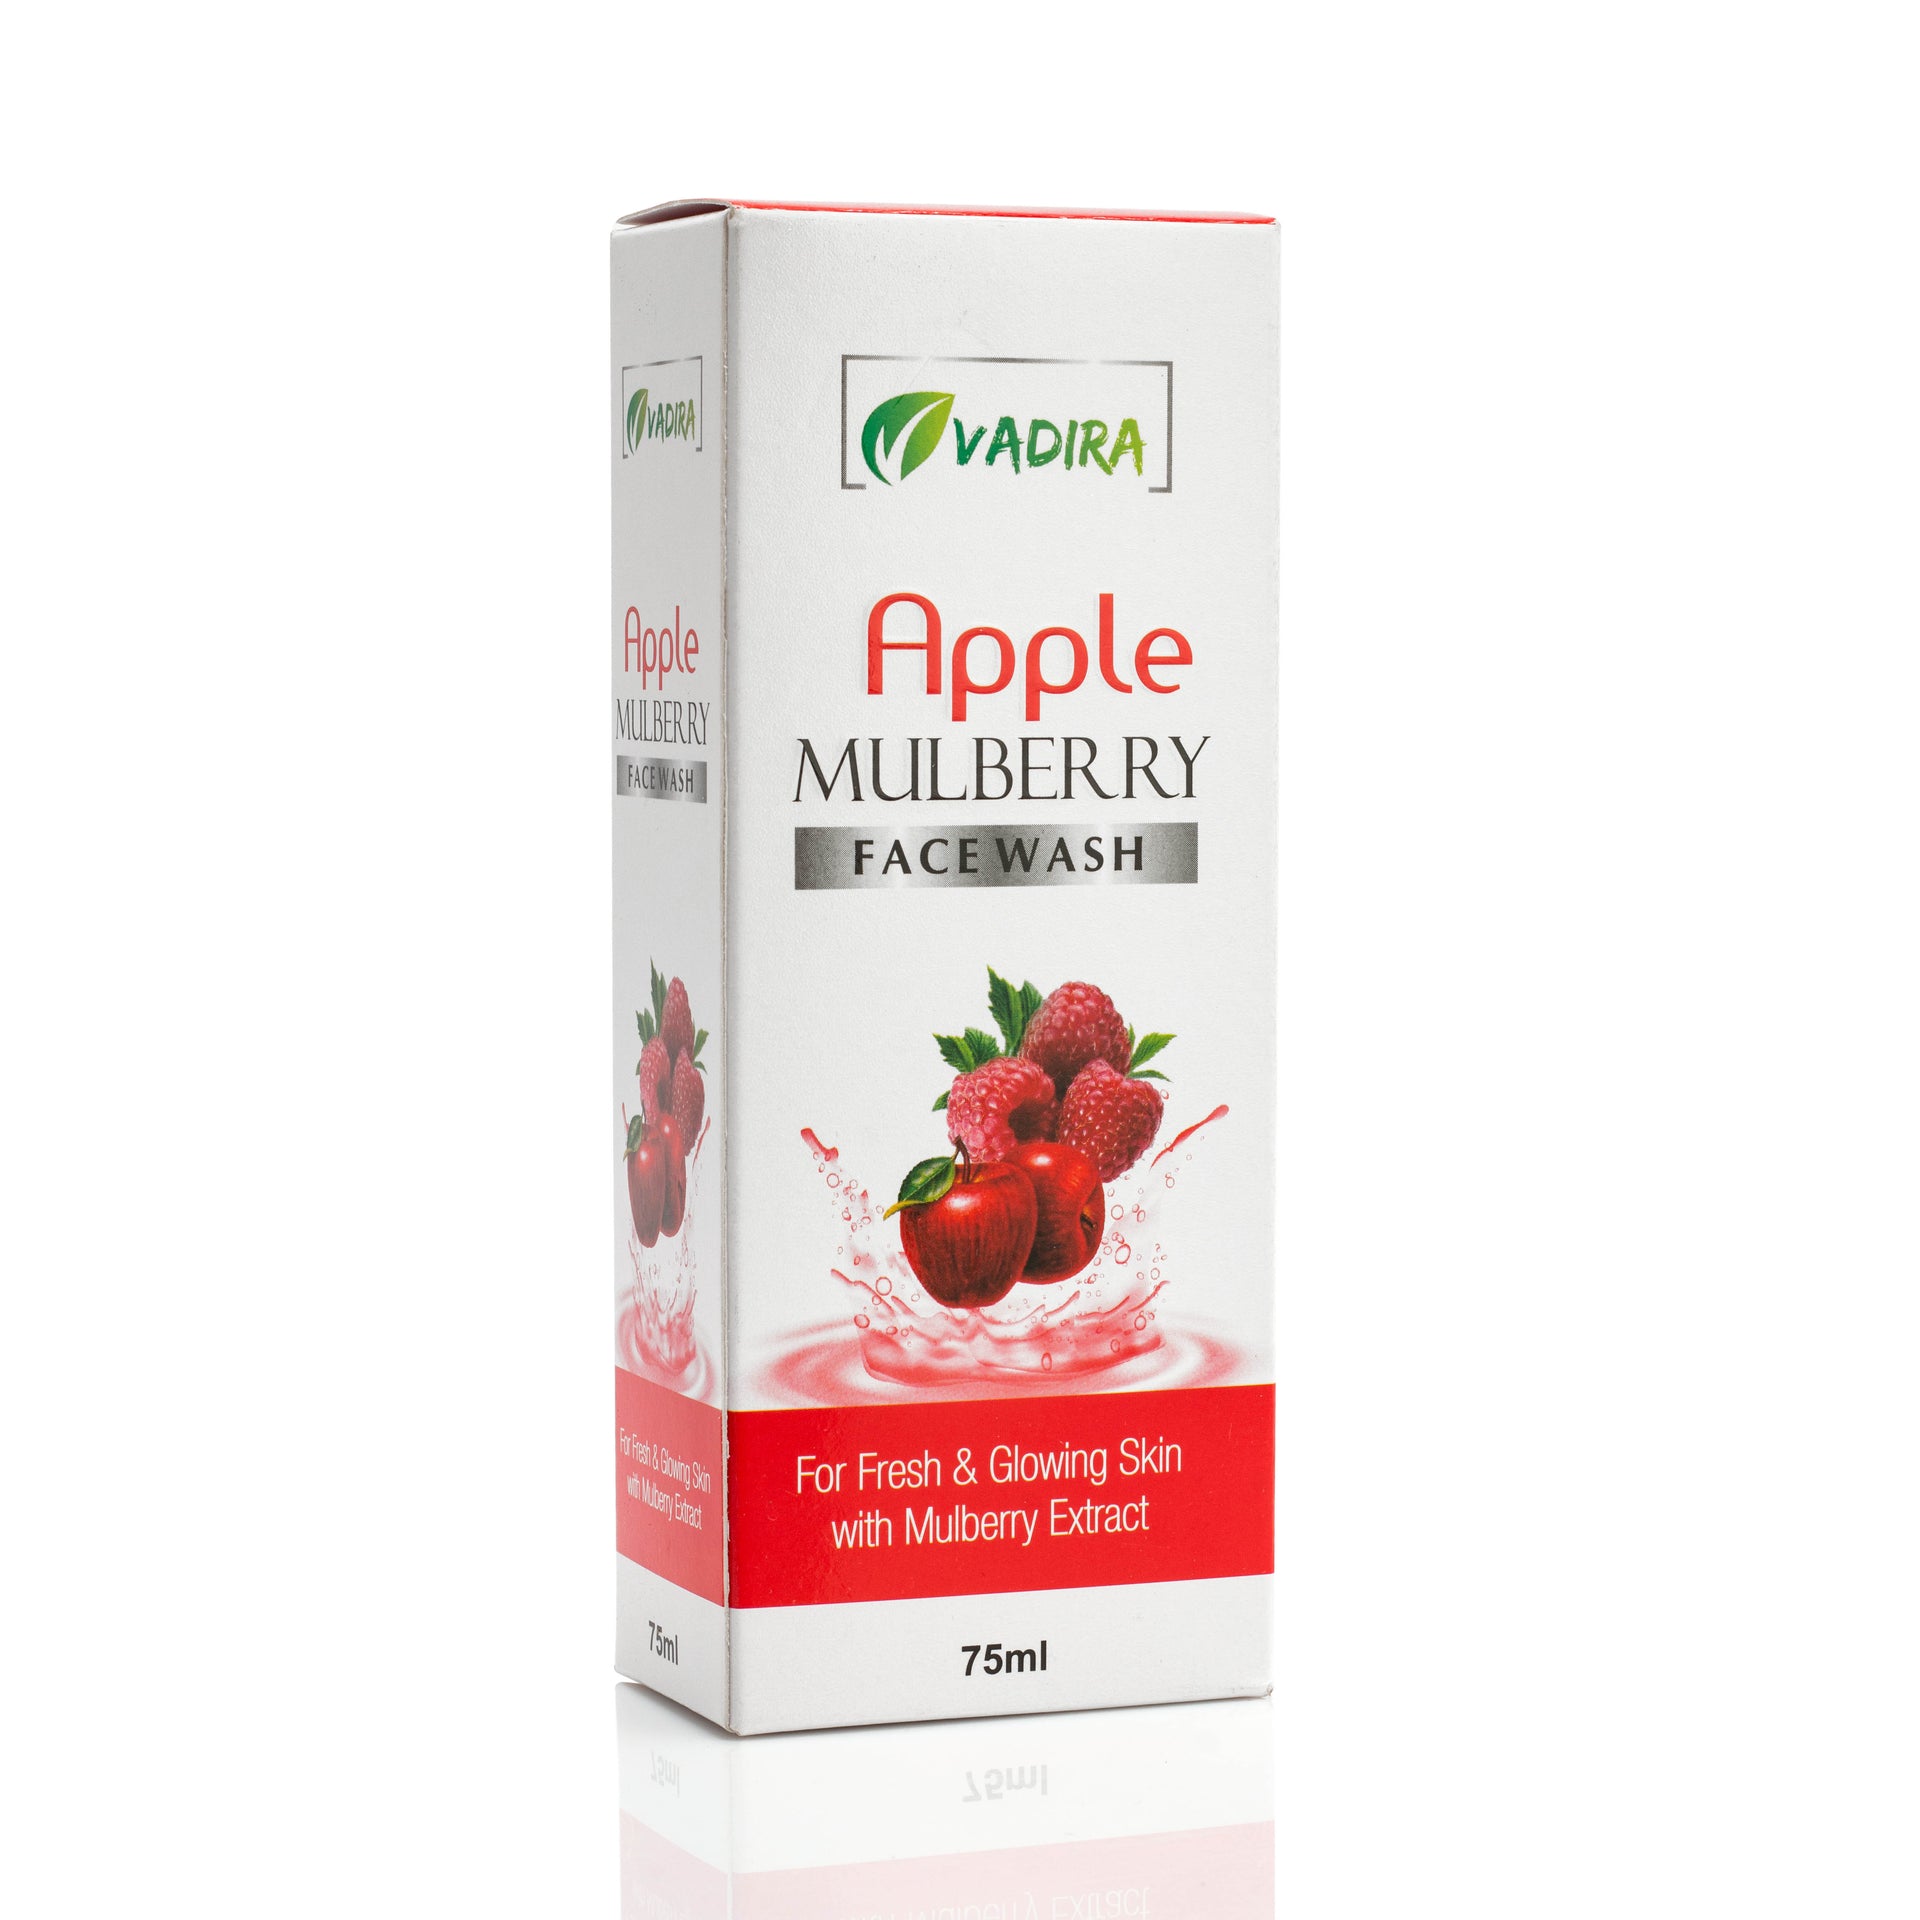 Vadira Apple Mulberry Face wash